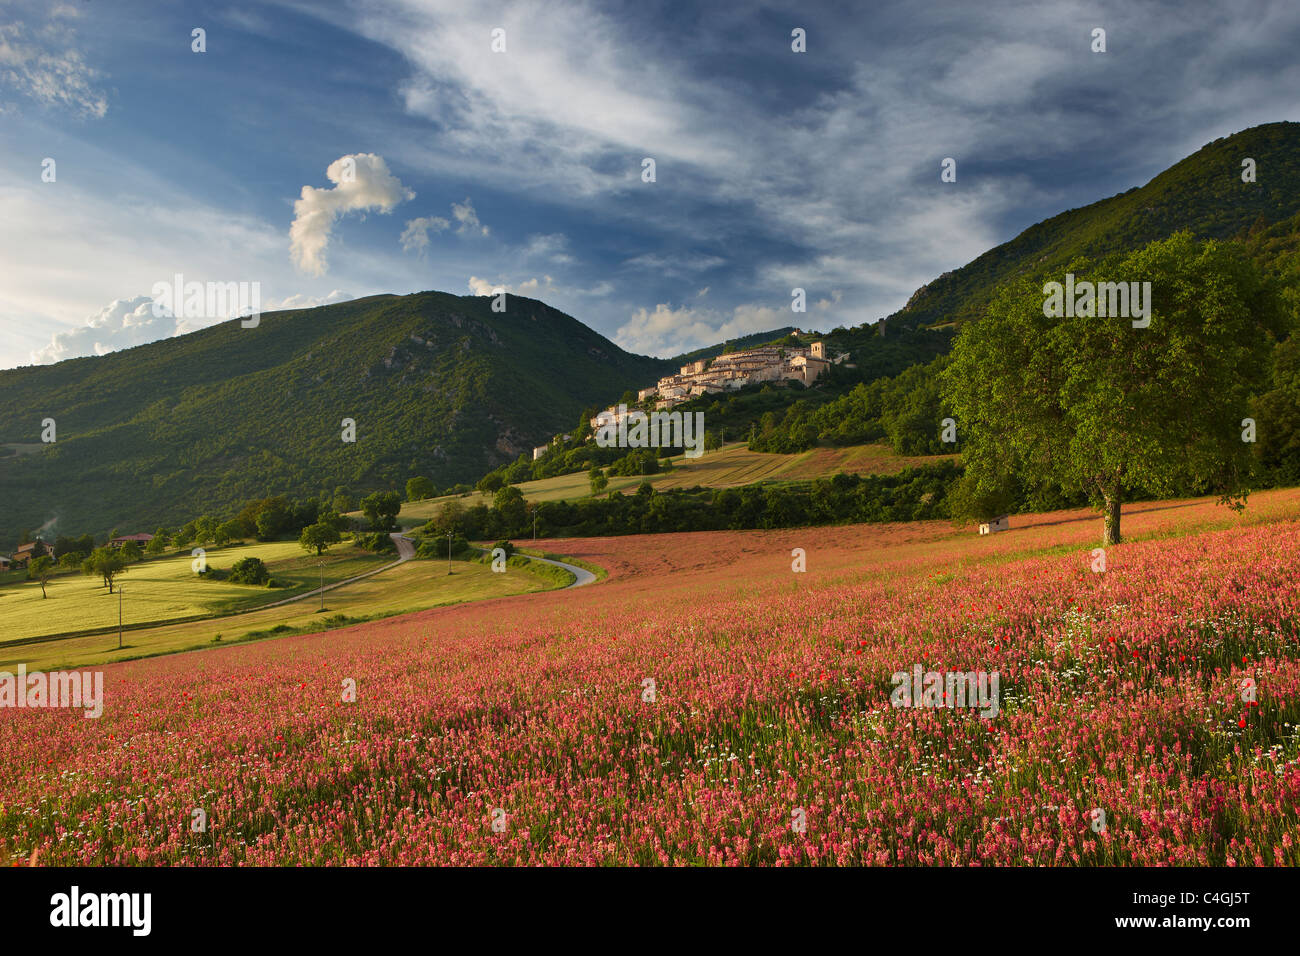 a field of sainfoin beneath the village of Campi Vechio, the Valnerina, Monti Sibillini National Park, Umbria, Italy Stock Photo